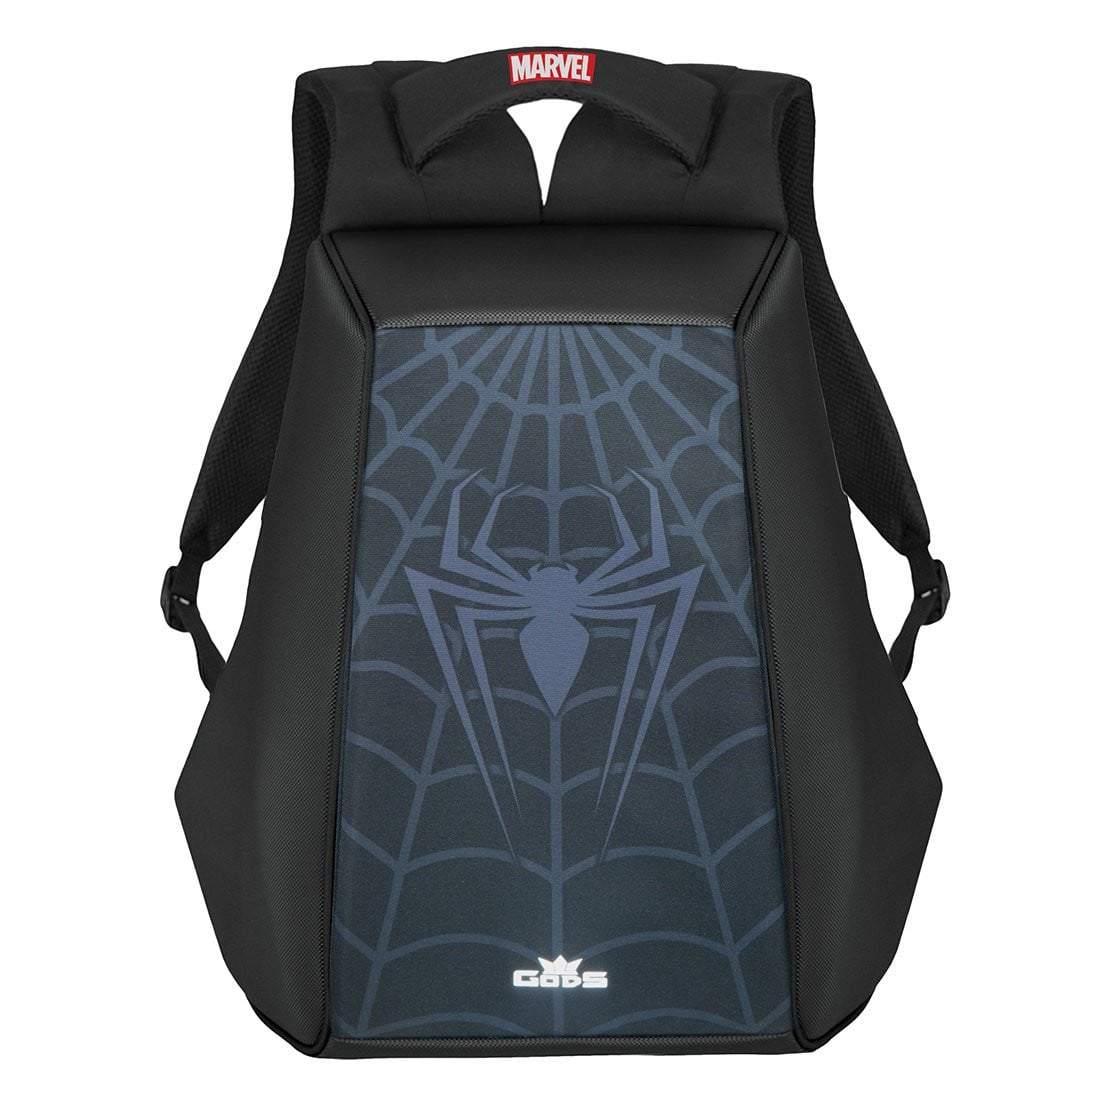 Buy Spiderman Backpack Online In India - Etsy India